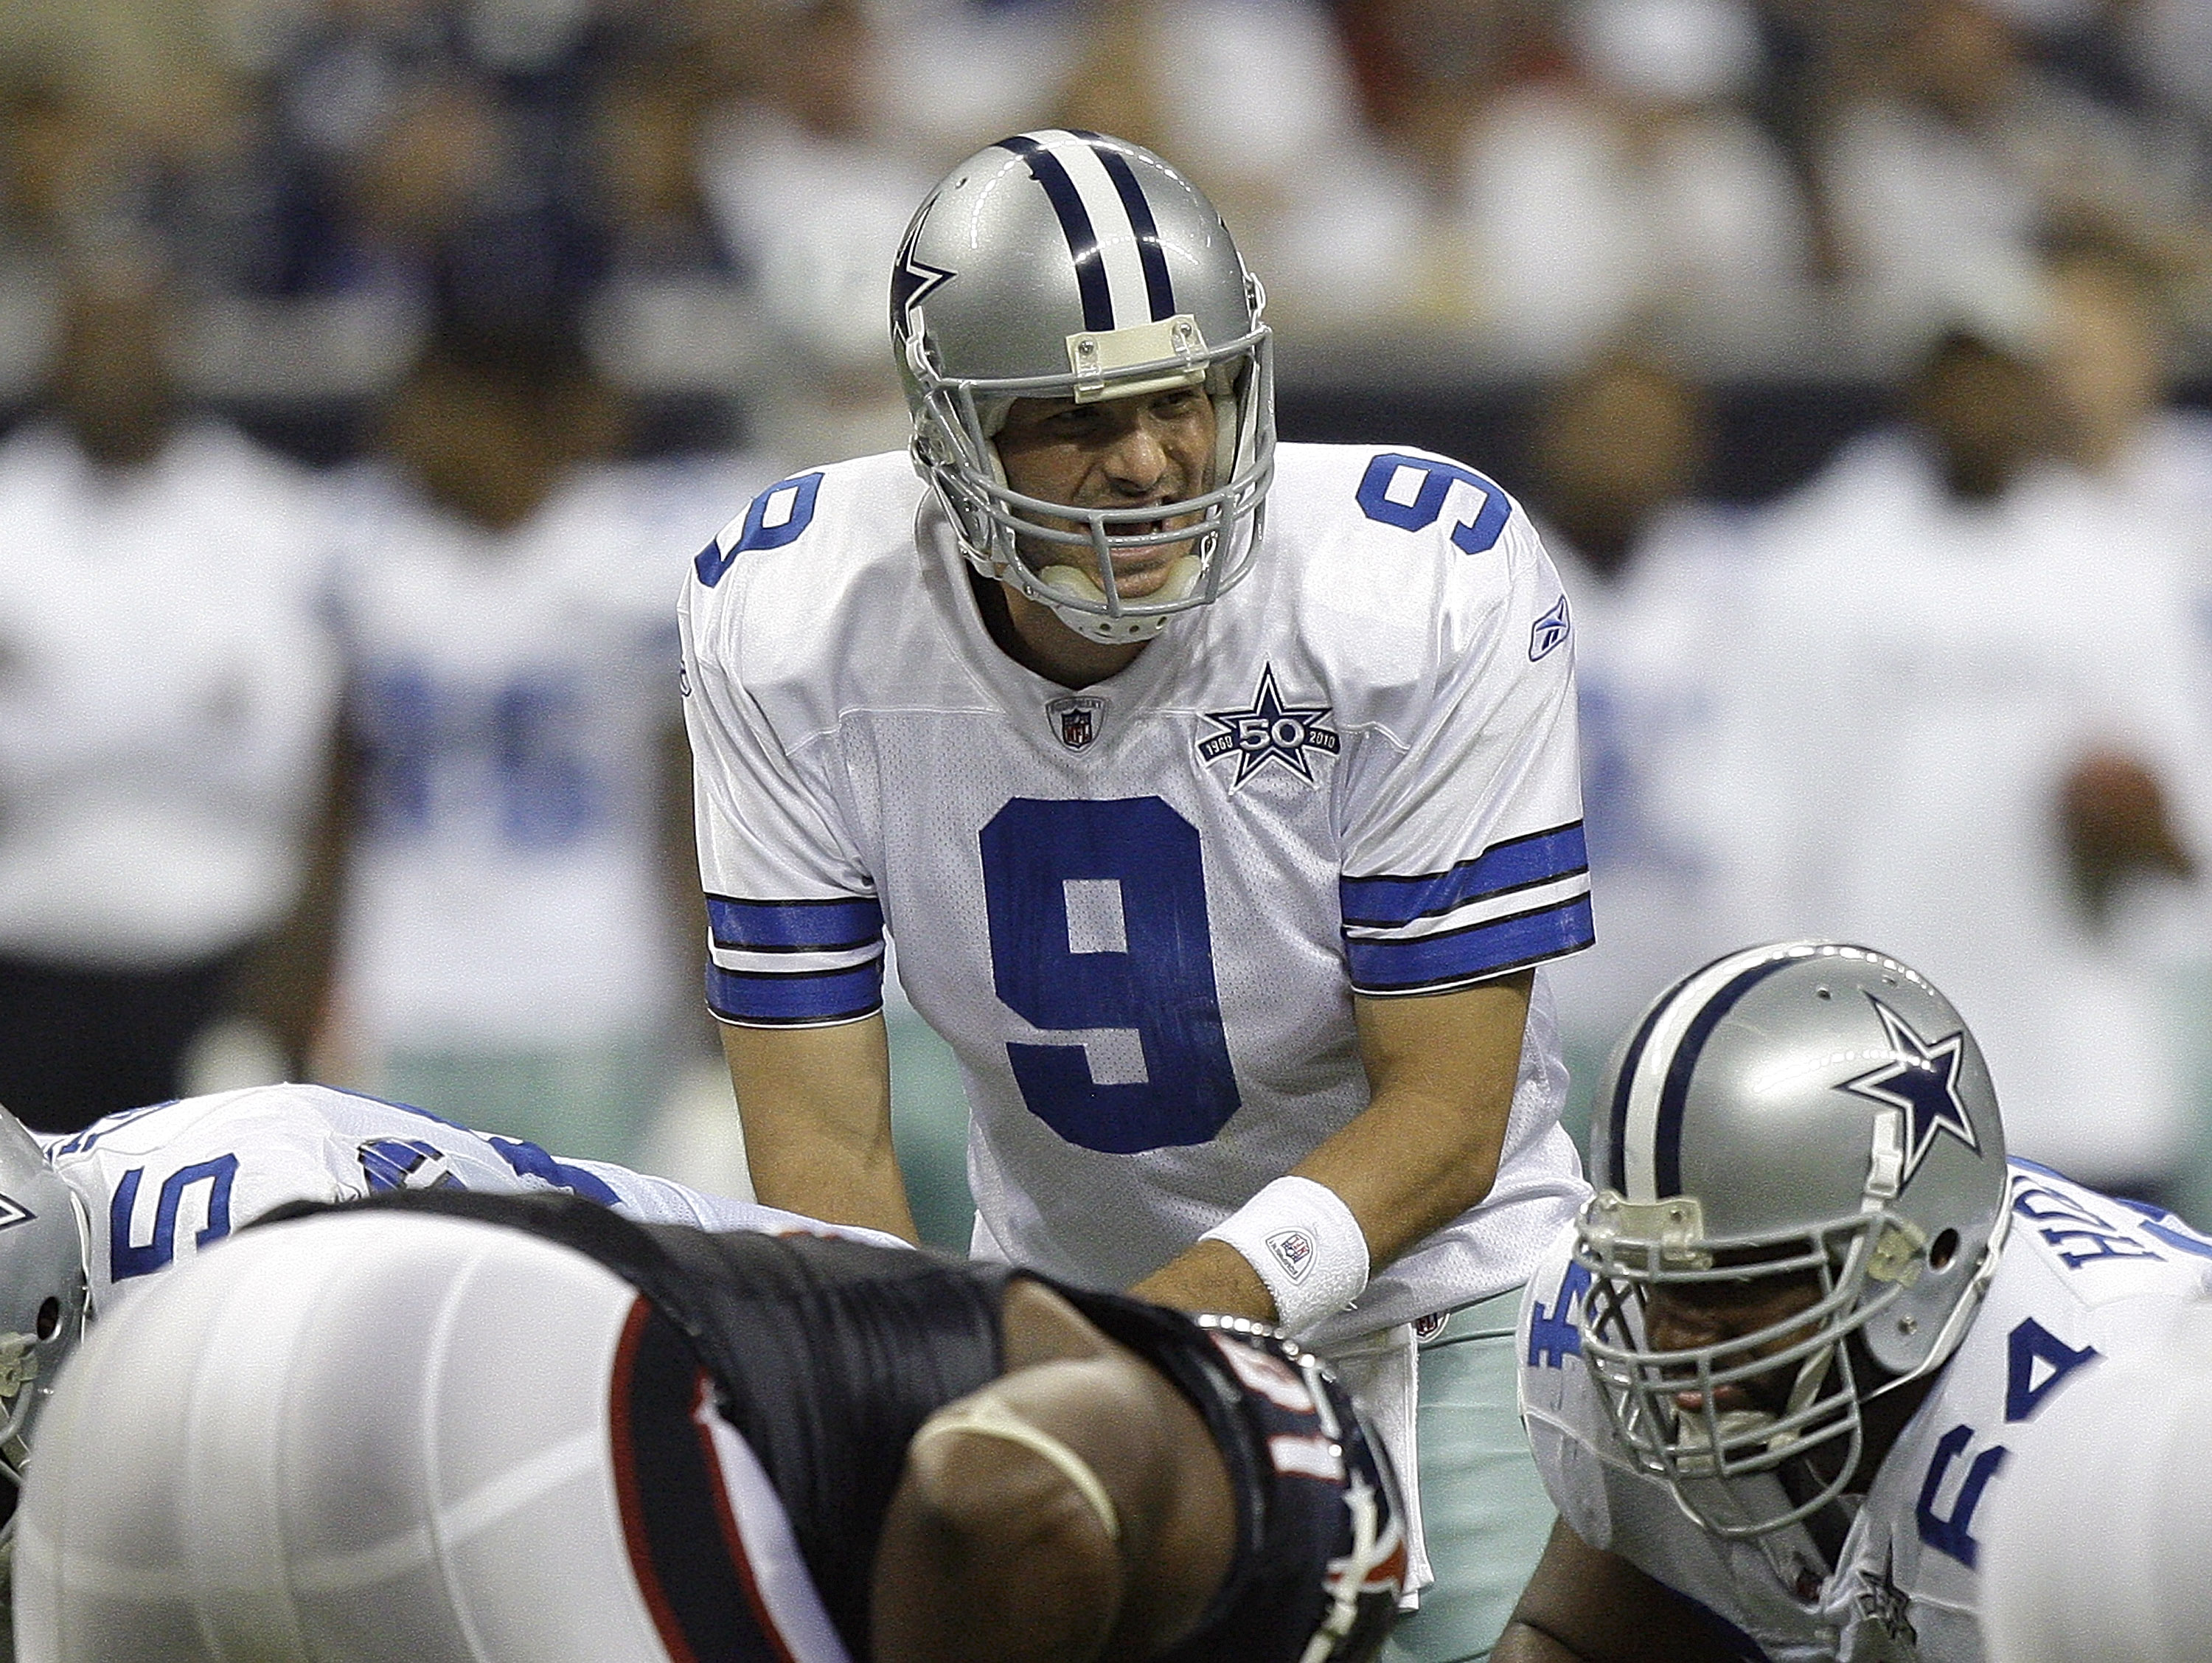 ESPN analyst Trent Dilfer's advice to Cowboys: Draft a QB, have him watch  'one of the greats of the game' Tony Romo